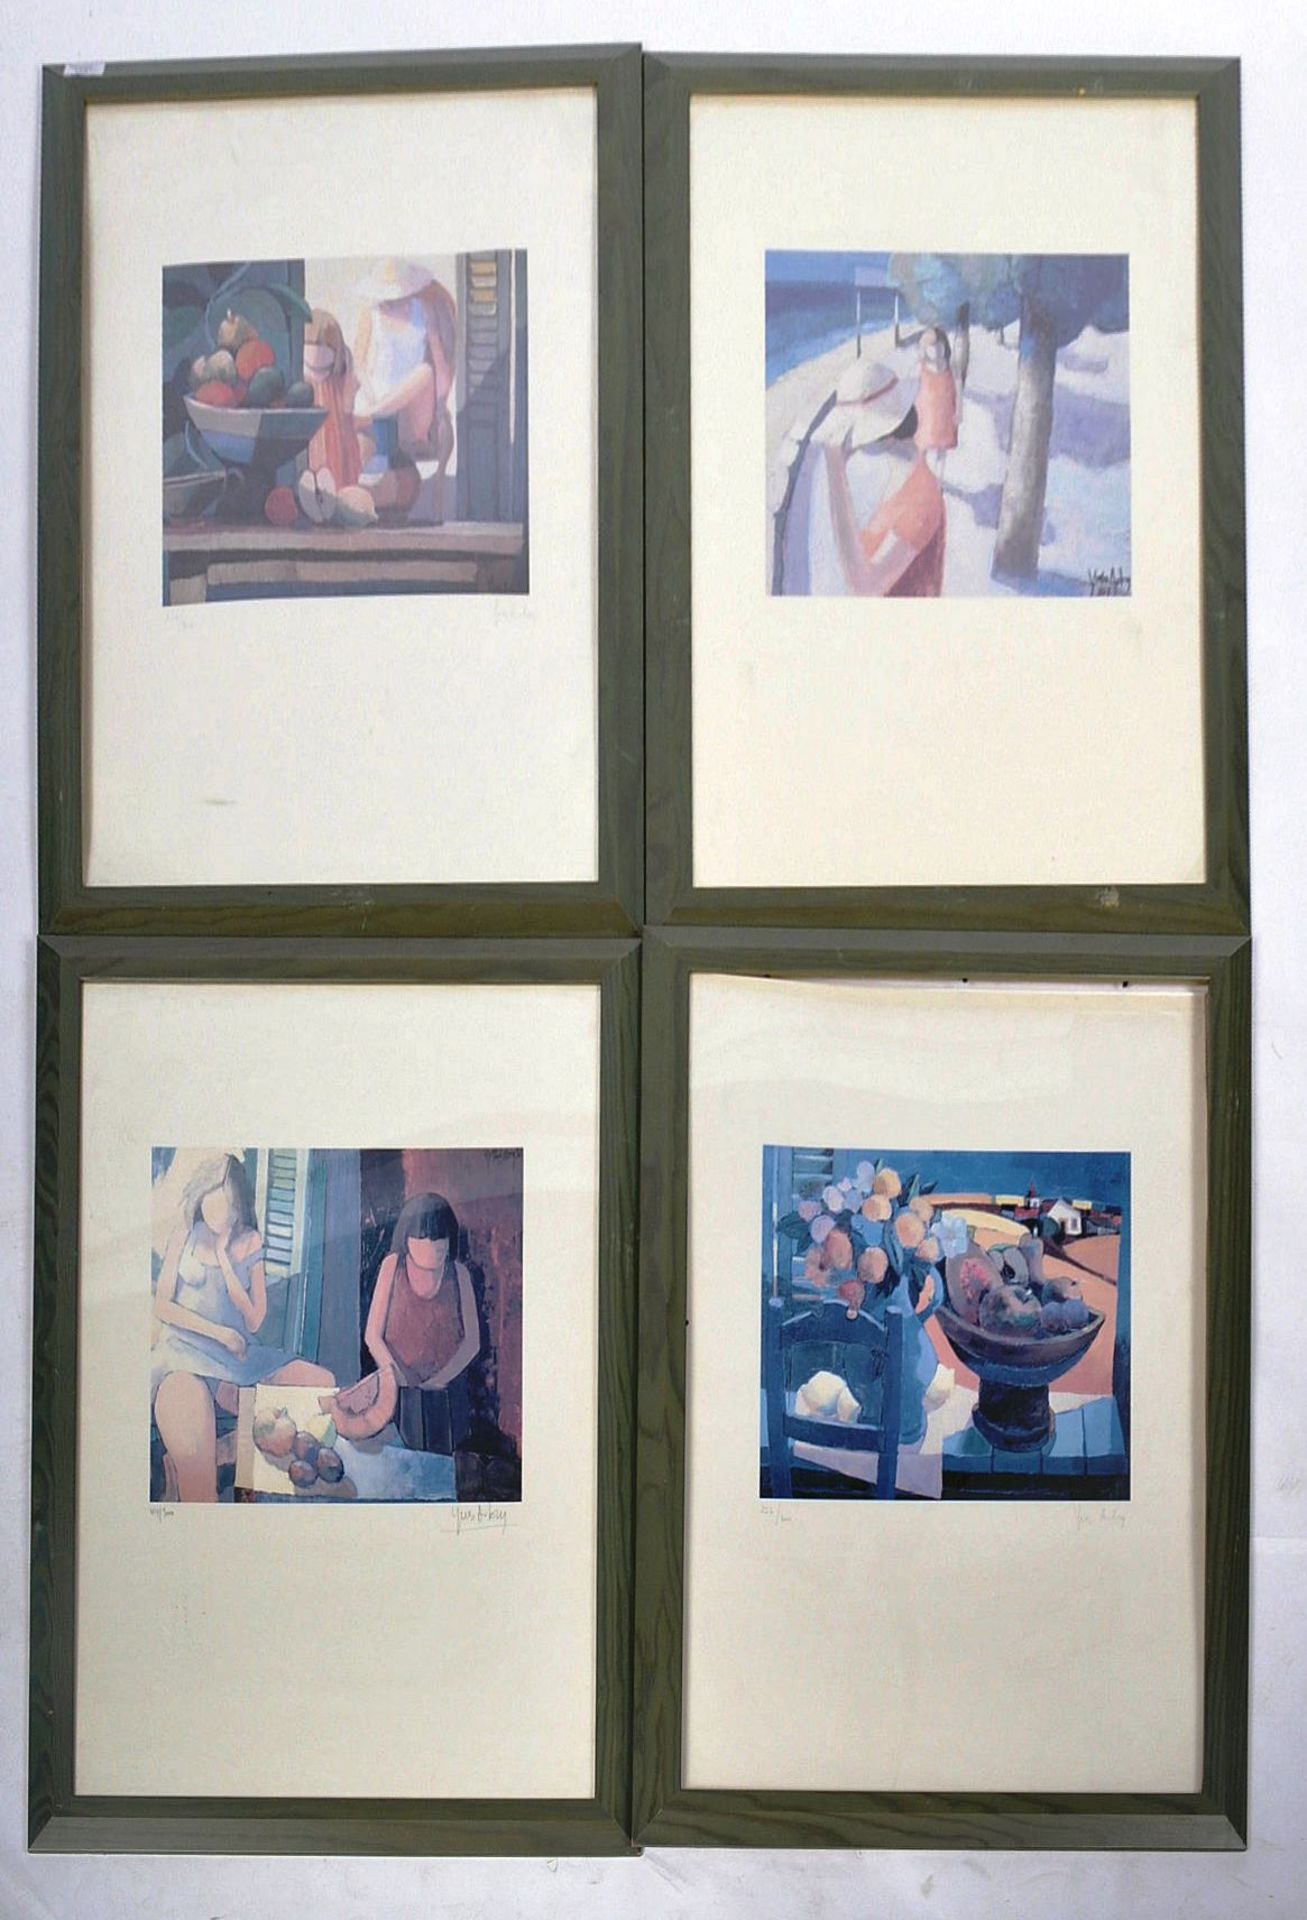 YVES AUBRY - SET OF FOUR SIGNED LIMITED EDITION PRINTS